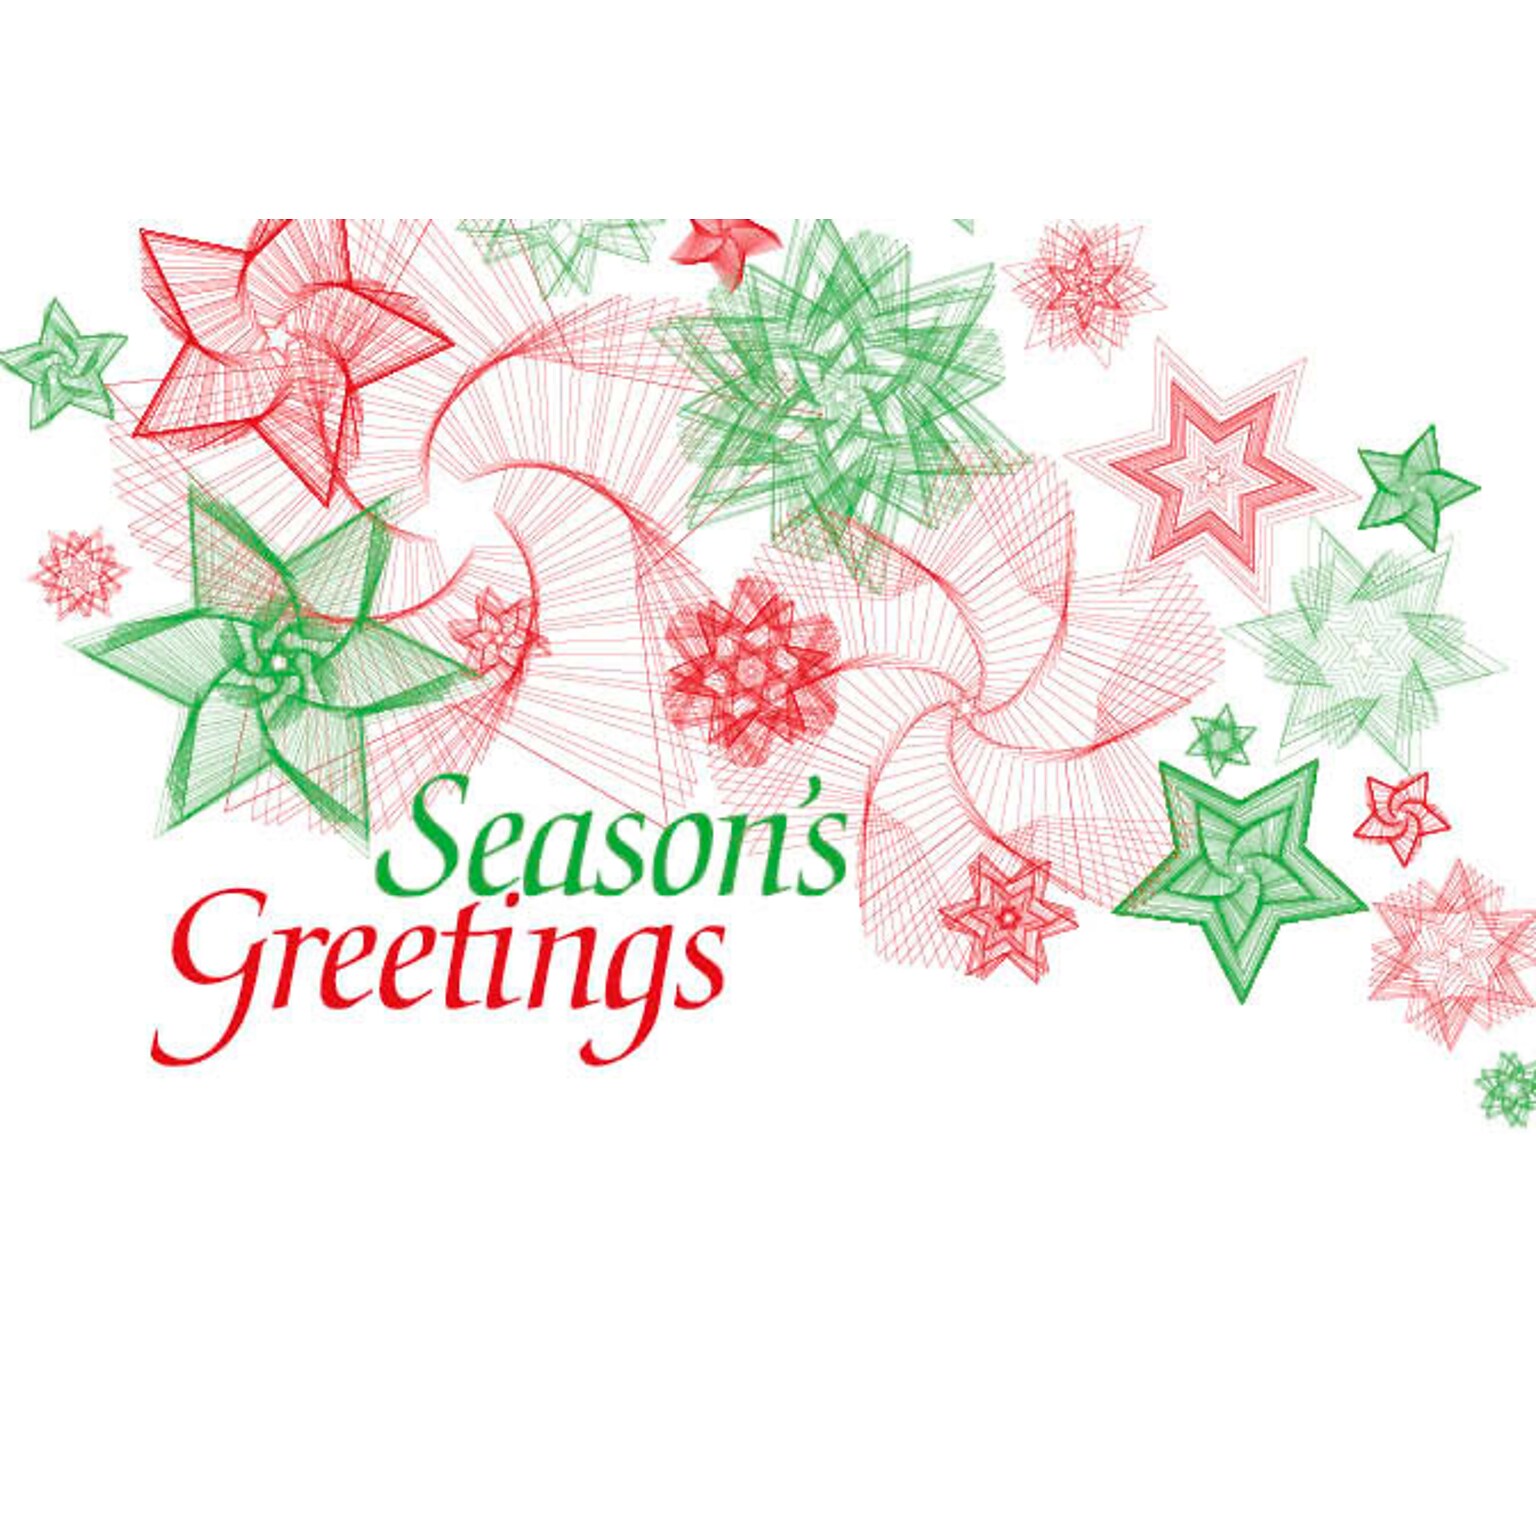 Seasons Greetings Sketches Of Stars Holiday Greeting Cards, With A7 Envelopes, 7 x 5, 25 Cards per Set